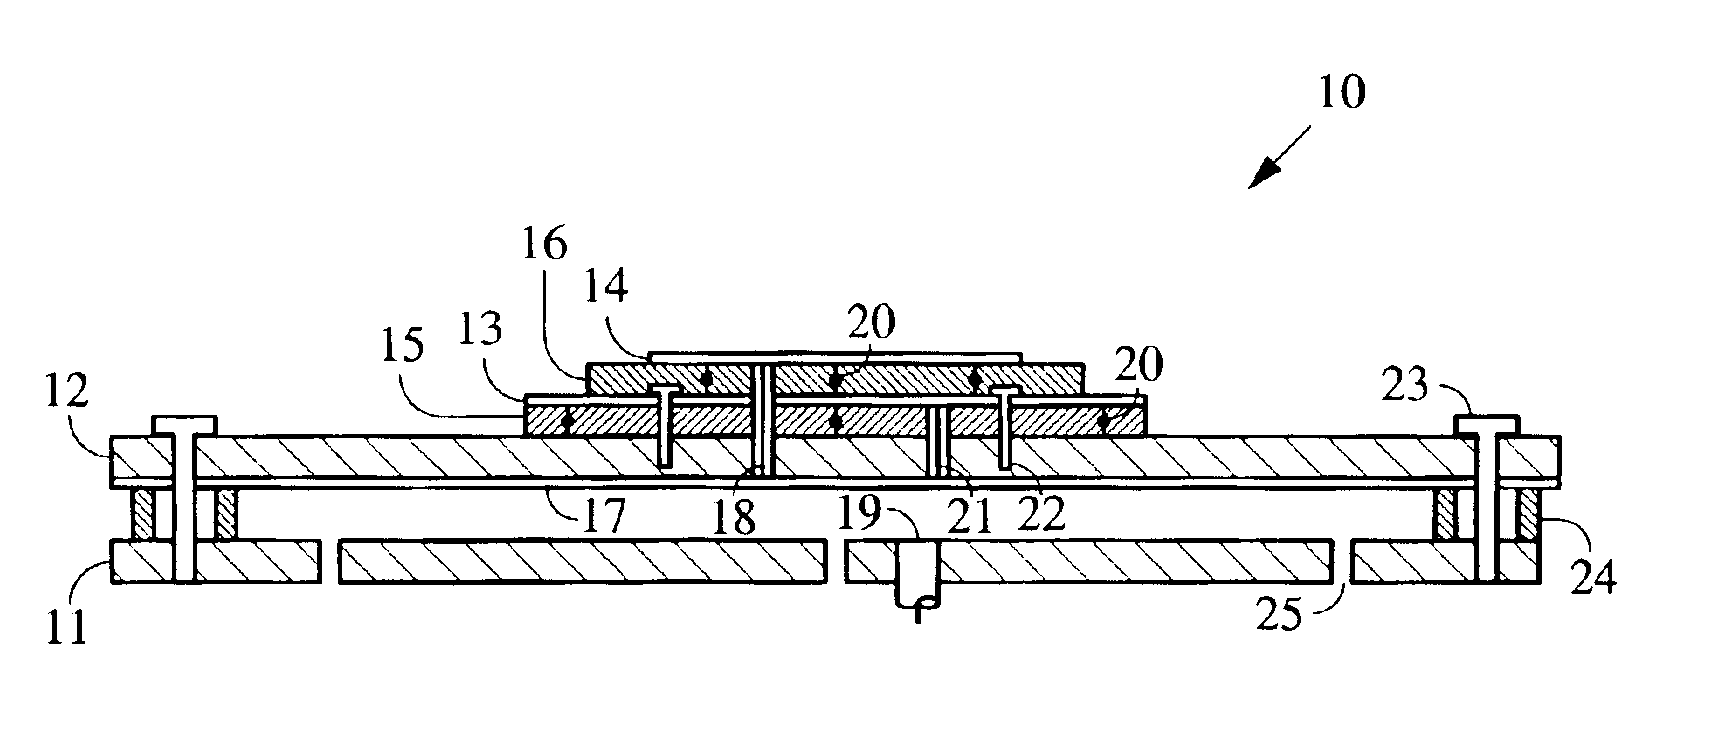 Dual-element microstrip patch antenna for mitigating radio frequency interference